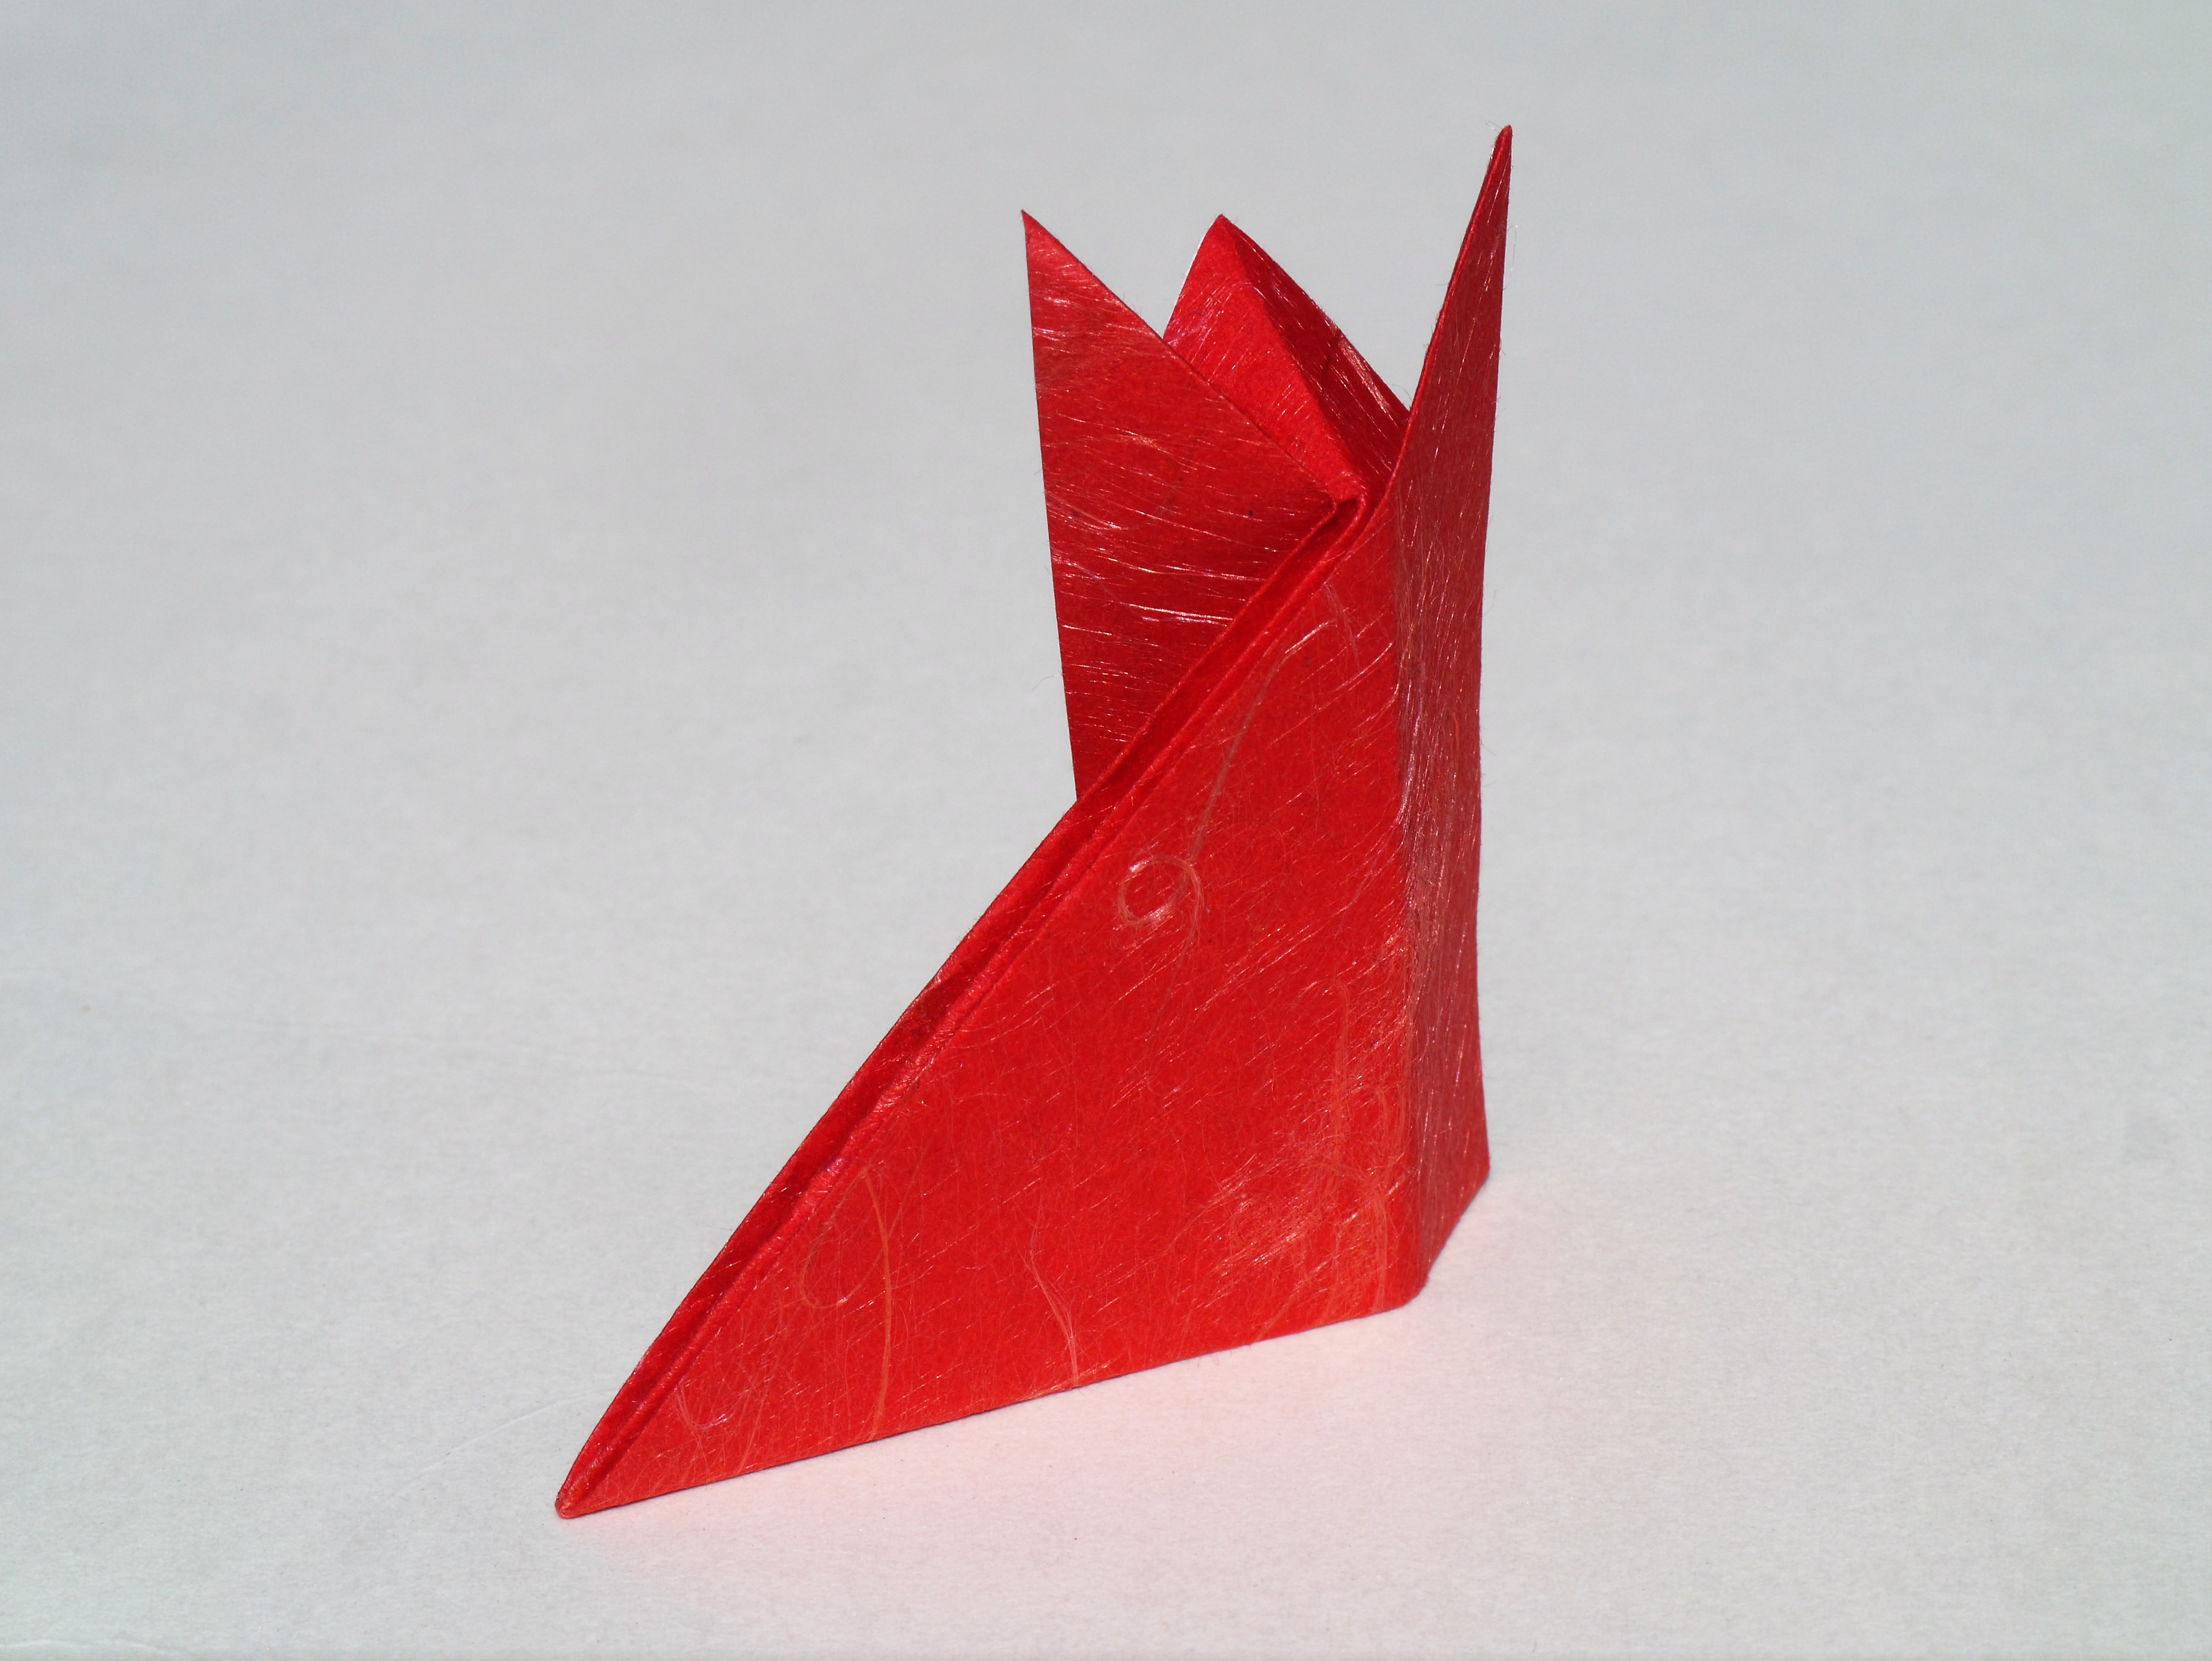 How To Make Origami Fox How To Make An Origami Fox In 8 Easy Steps From Japan Blog